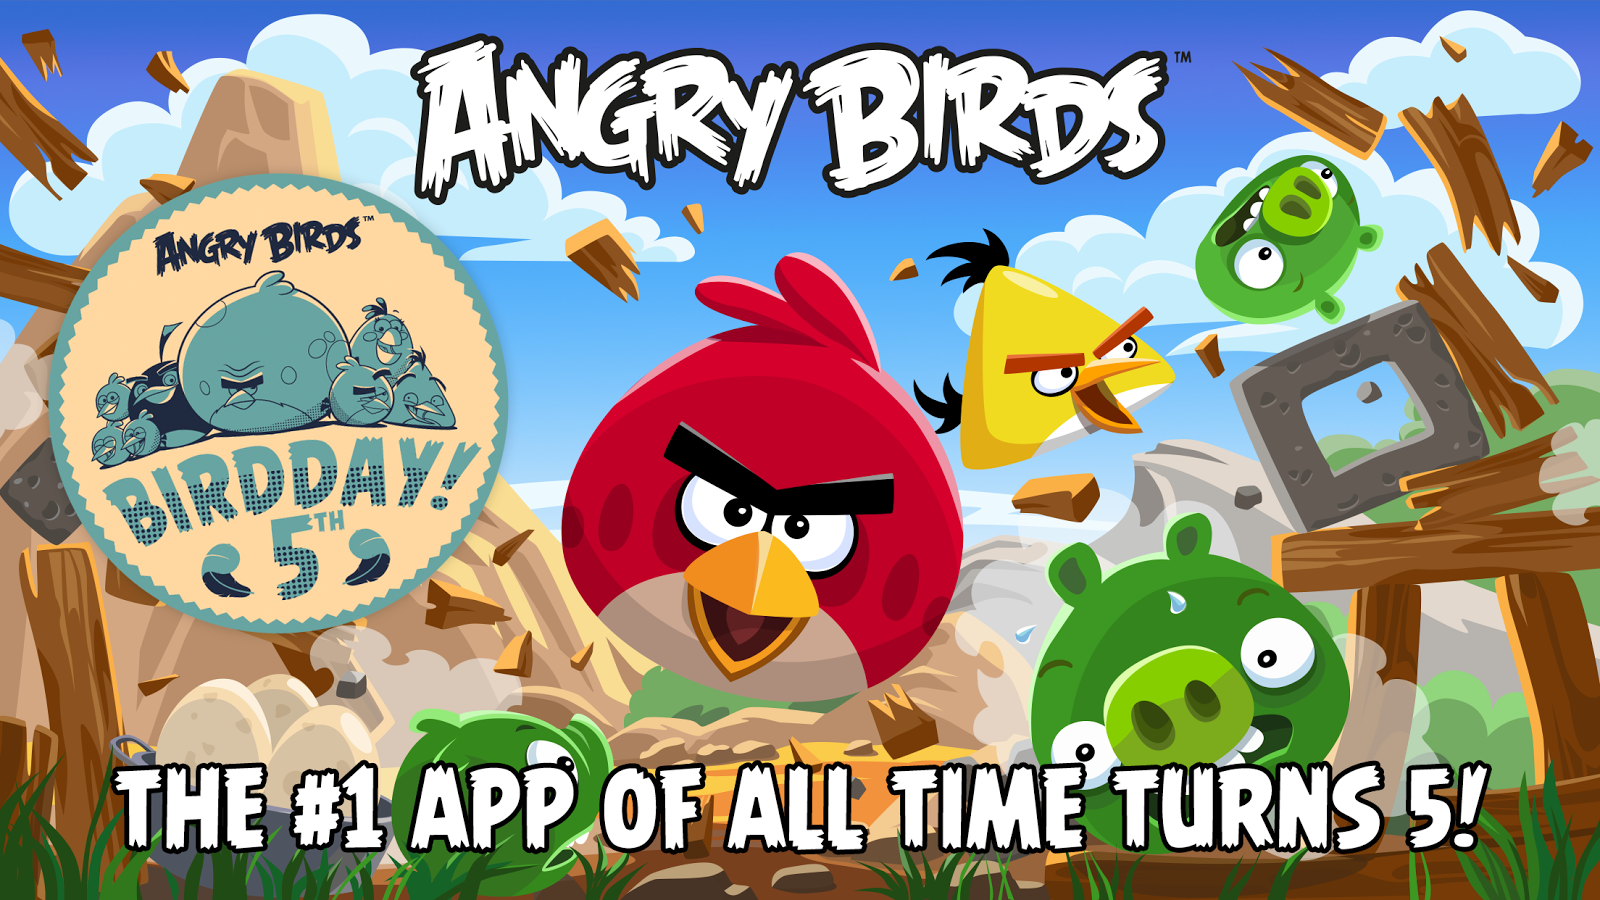 Angry Birds android games}